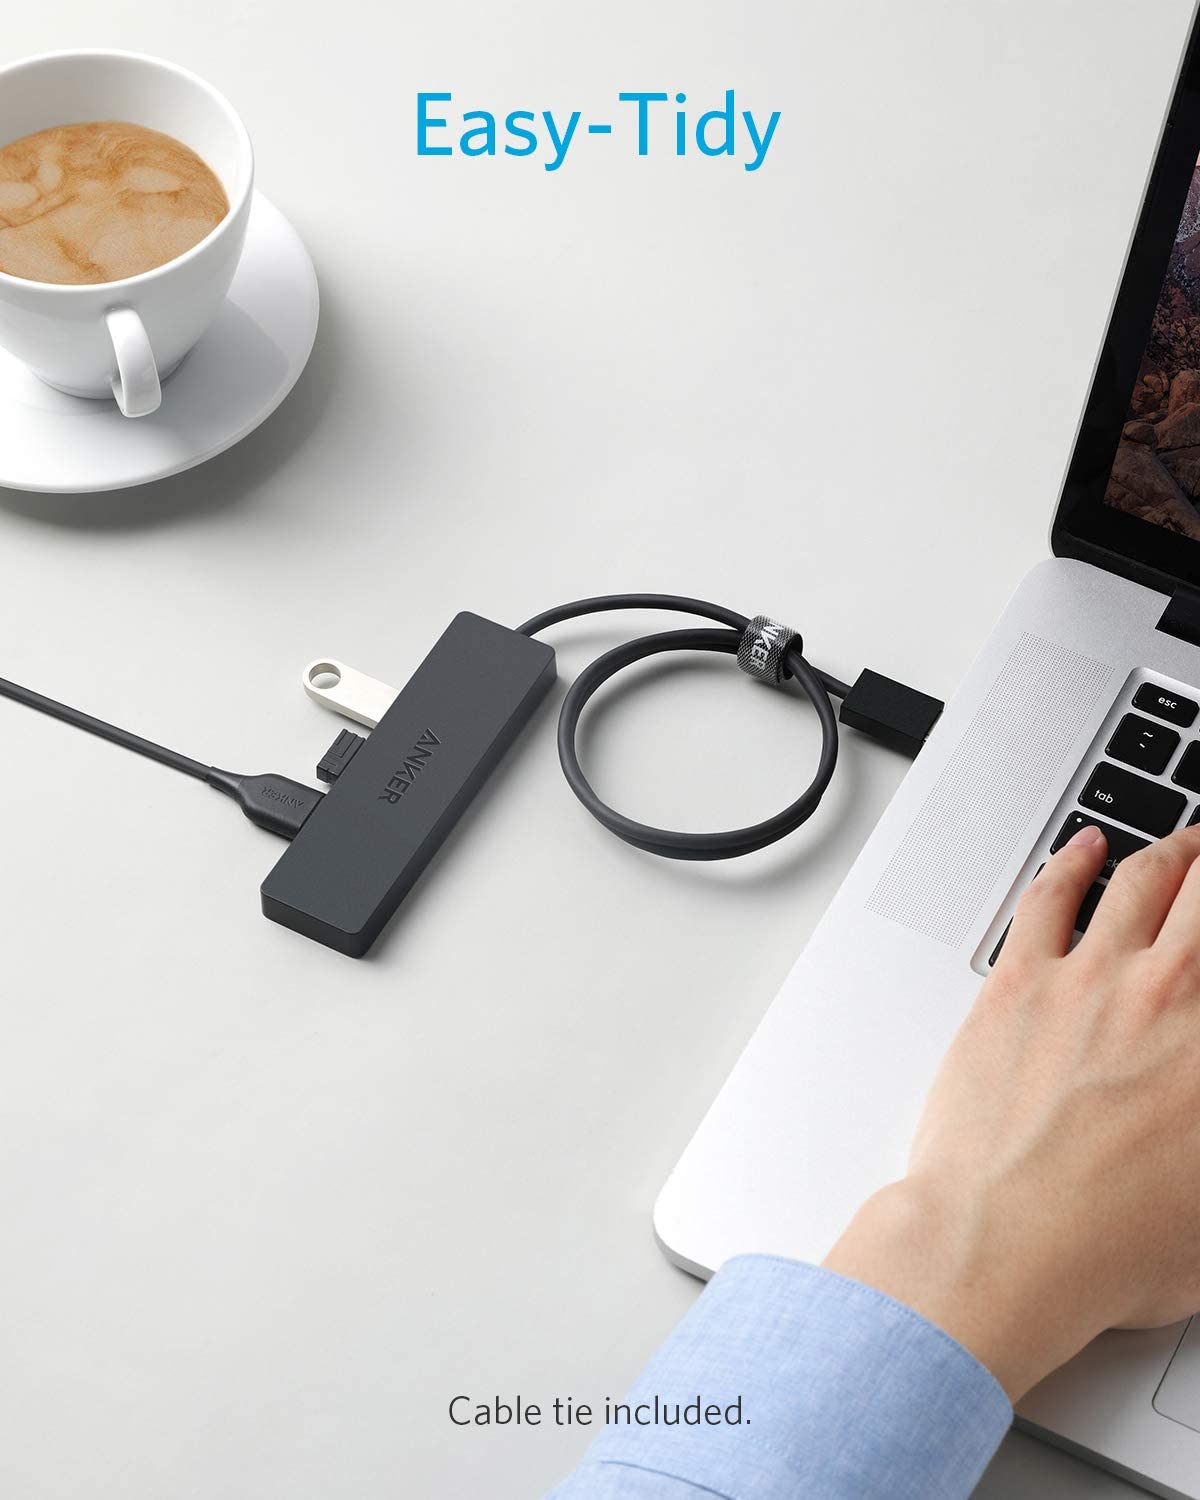 Anker 4-Port USB 3.0 Hub with 2 ft Extended Cable